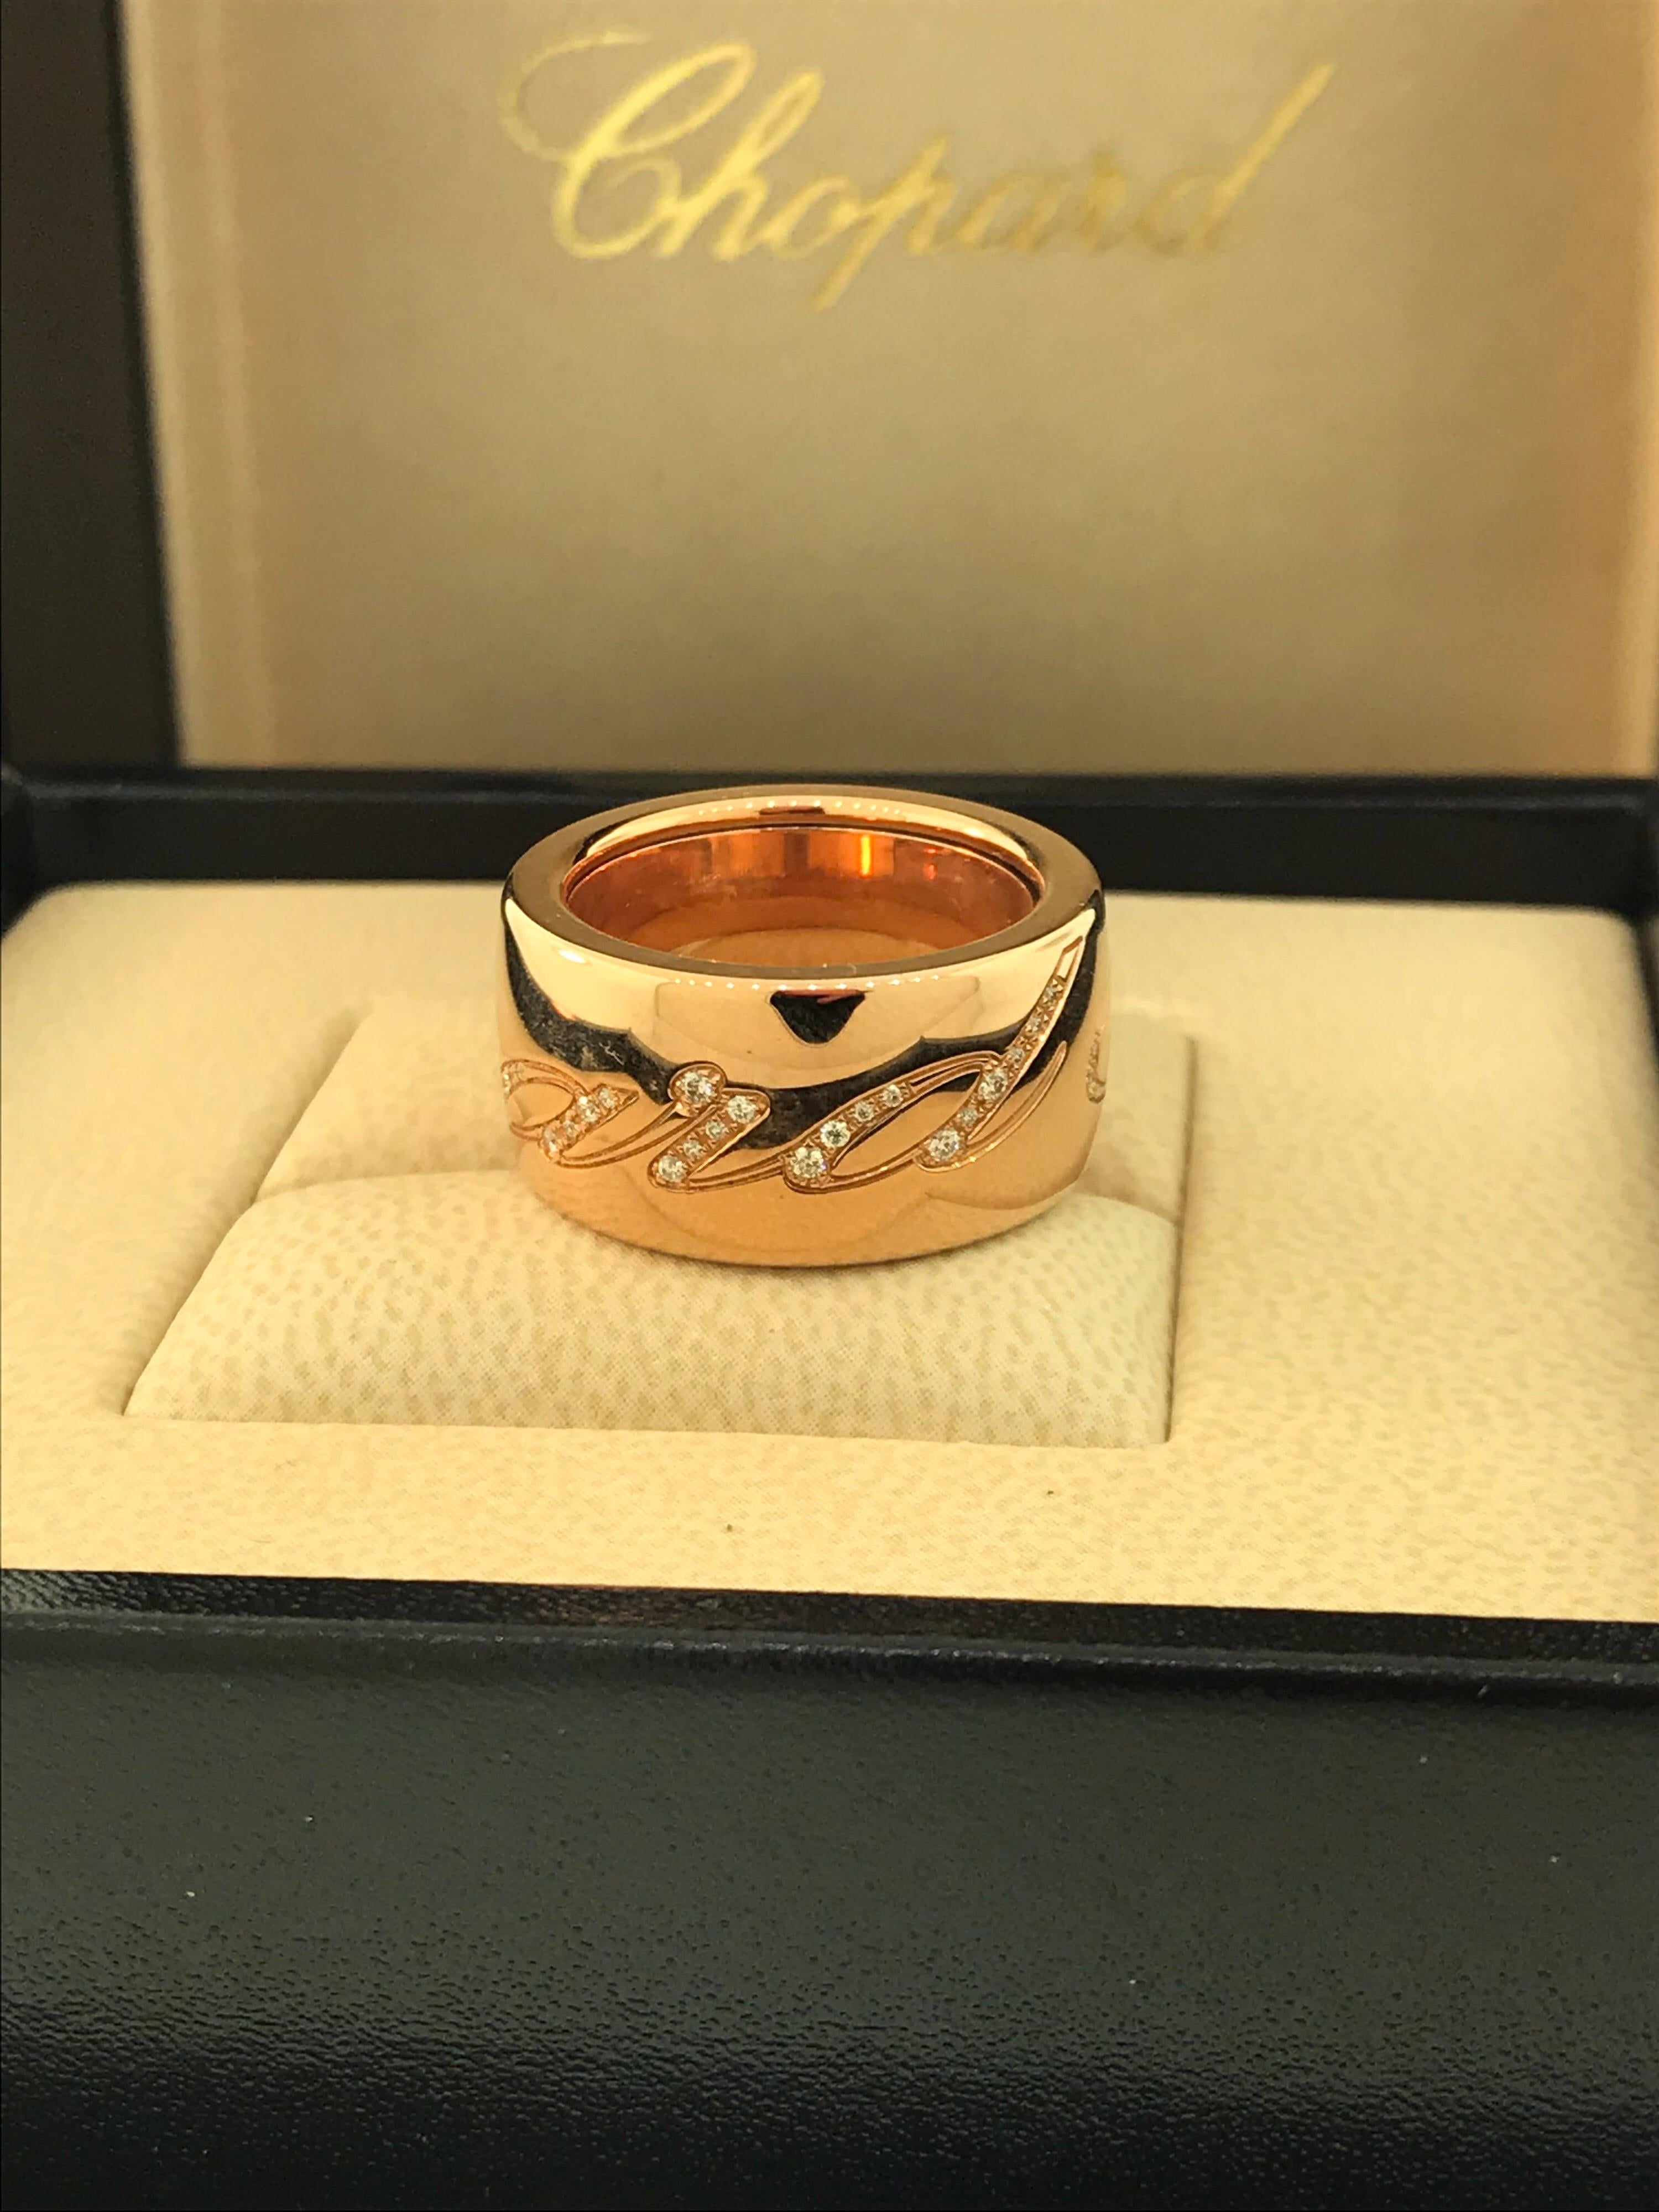 Chopard Chopardissimo Diamond Ring

Model Number 82/6580-5208

100% Authentic

Brand New

Comes with original Chopard Box, Certificate of Authenticity and Warranty, and Jewels Manual

18 Karat Rose Gold

Size 5.5 (51)

76 DIAMONDS ON THE RING (.28